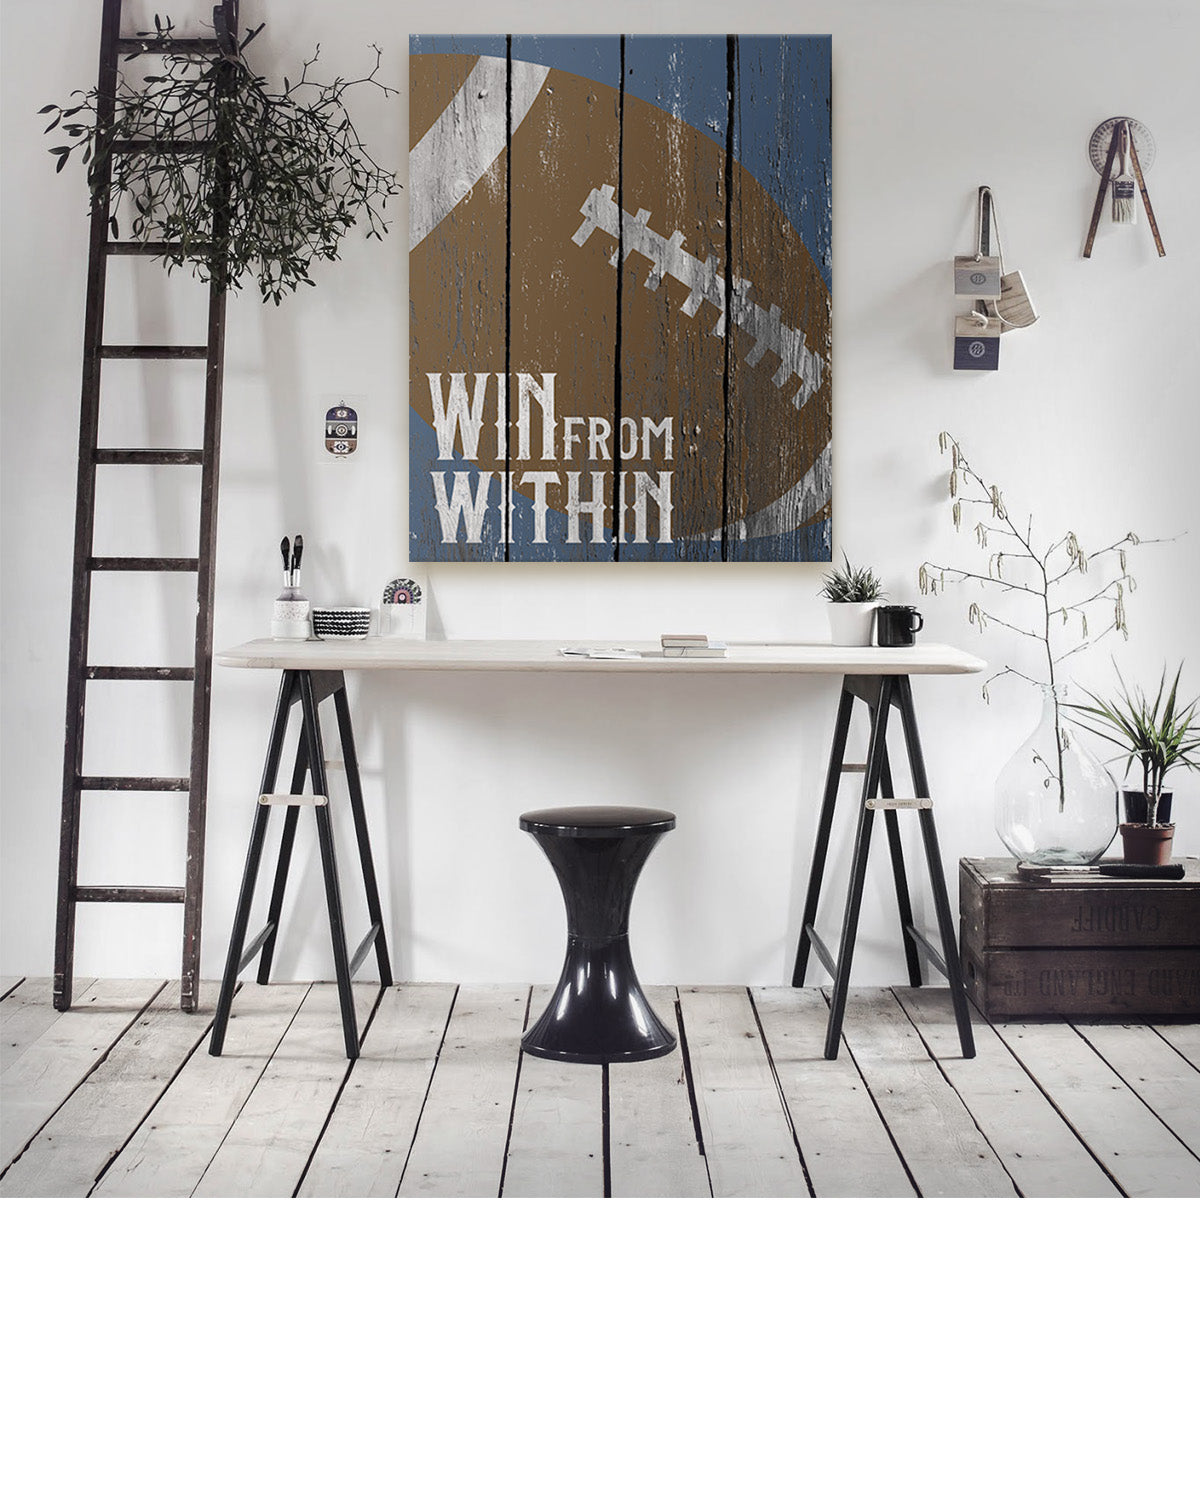 Win from Within - Wall Decor Art Print - Great gift for football fans - Poster & Canvas Sizes